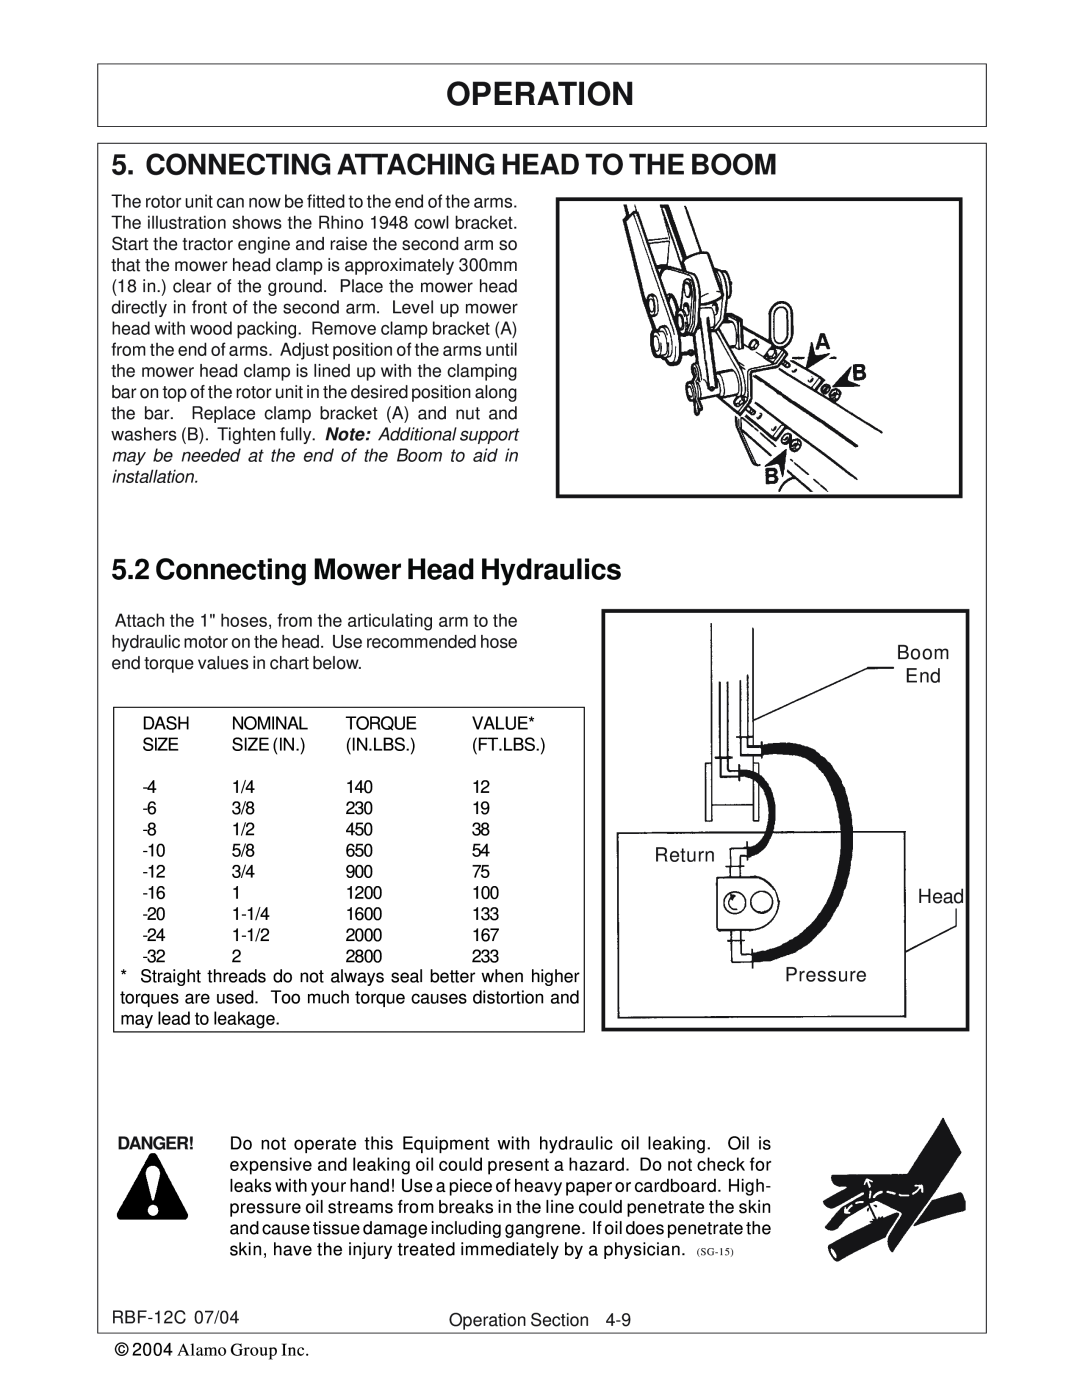 Tiger Products Co., Ltd RBF-12C manual Connecting Attaching Head To The Boom, Connecting Mower Head Hydraulics, Operation 